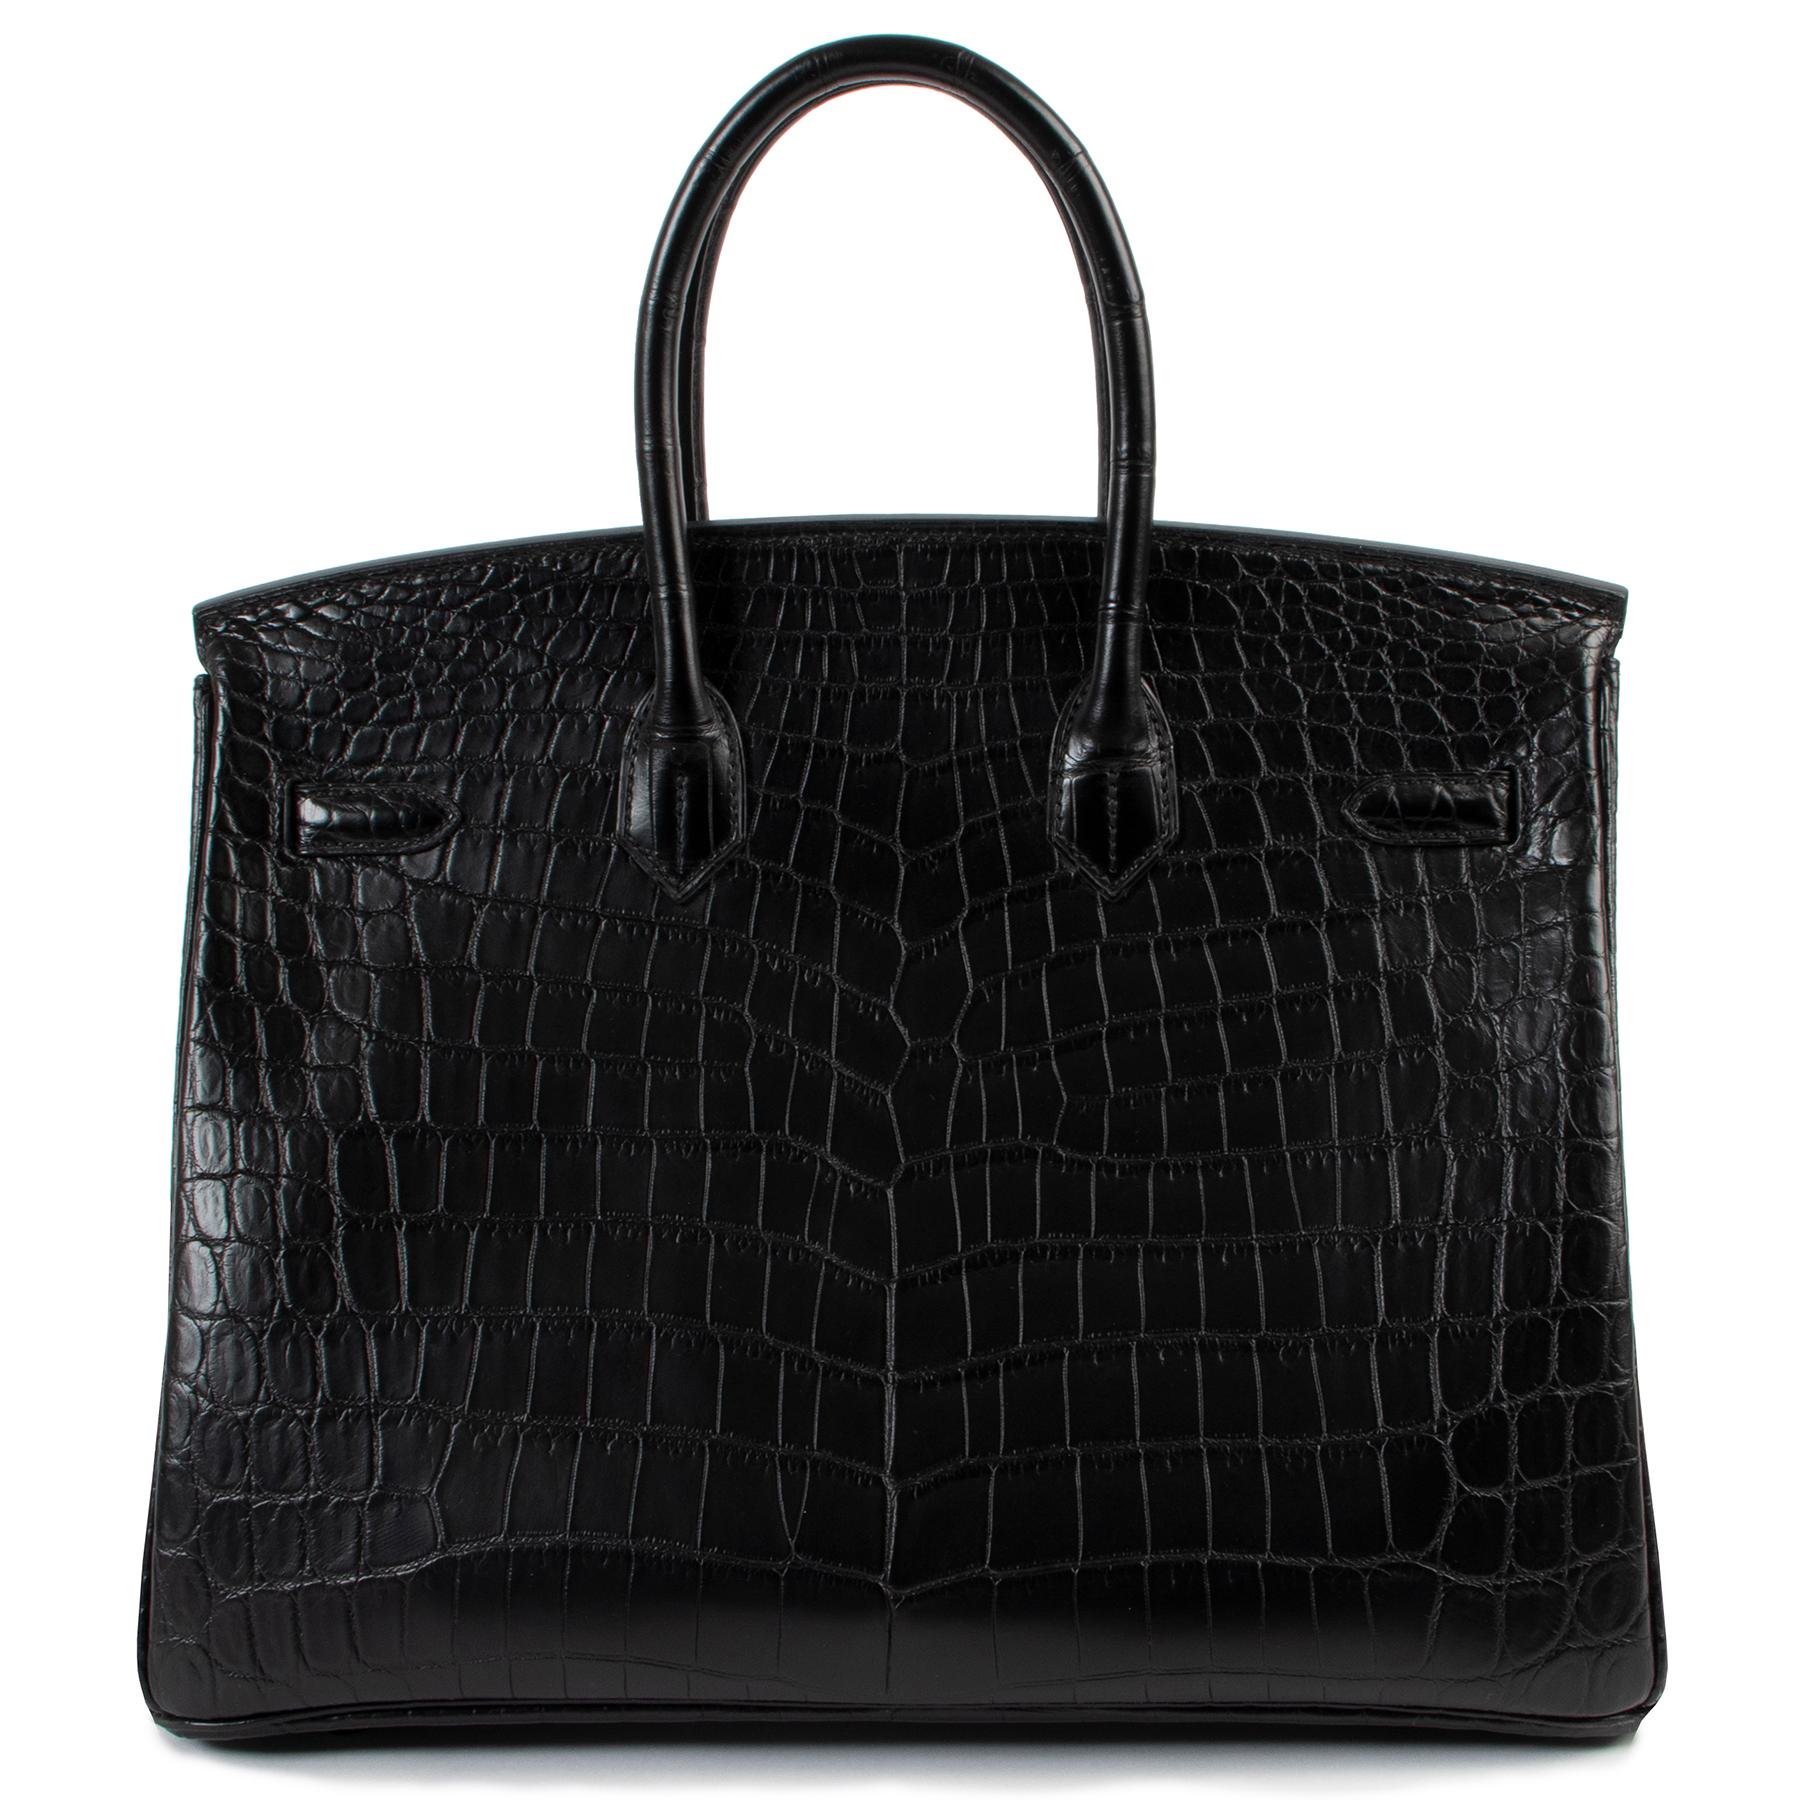 Hermes *LIMITED* Birkin 35 So Black Matte Niloticus Crocodile

HURRY HURRY !!! Get your hands on this stunning very rare Hermes Birkin So Black.  It is one of the rarest and most desirable Birkin bags.  Crafted in matte black niloticus crocodile, as